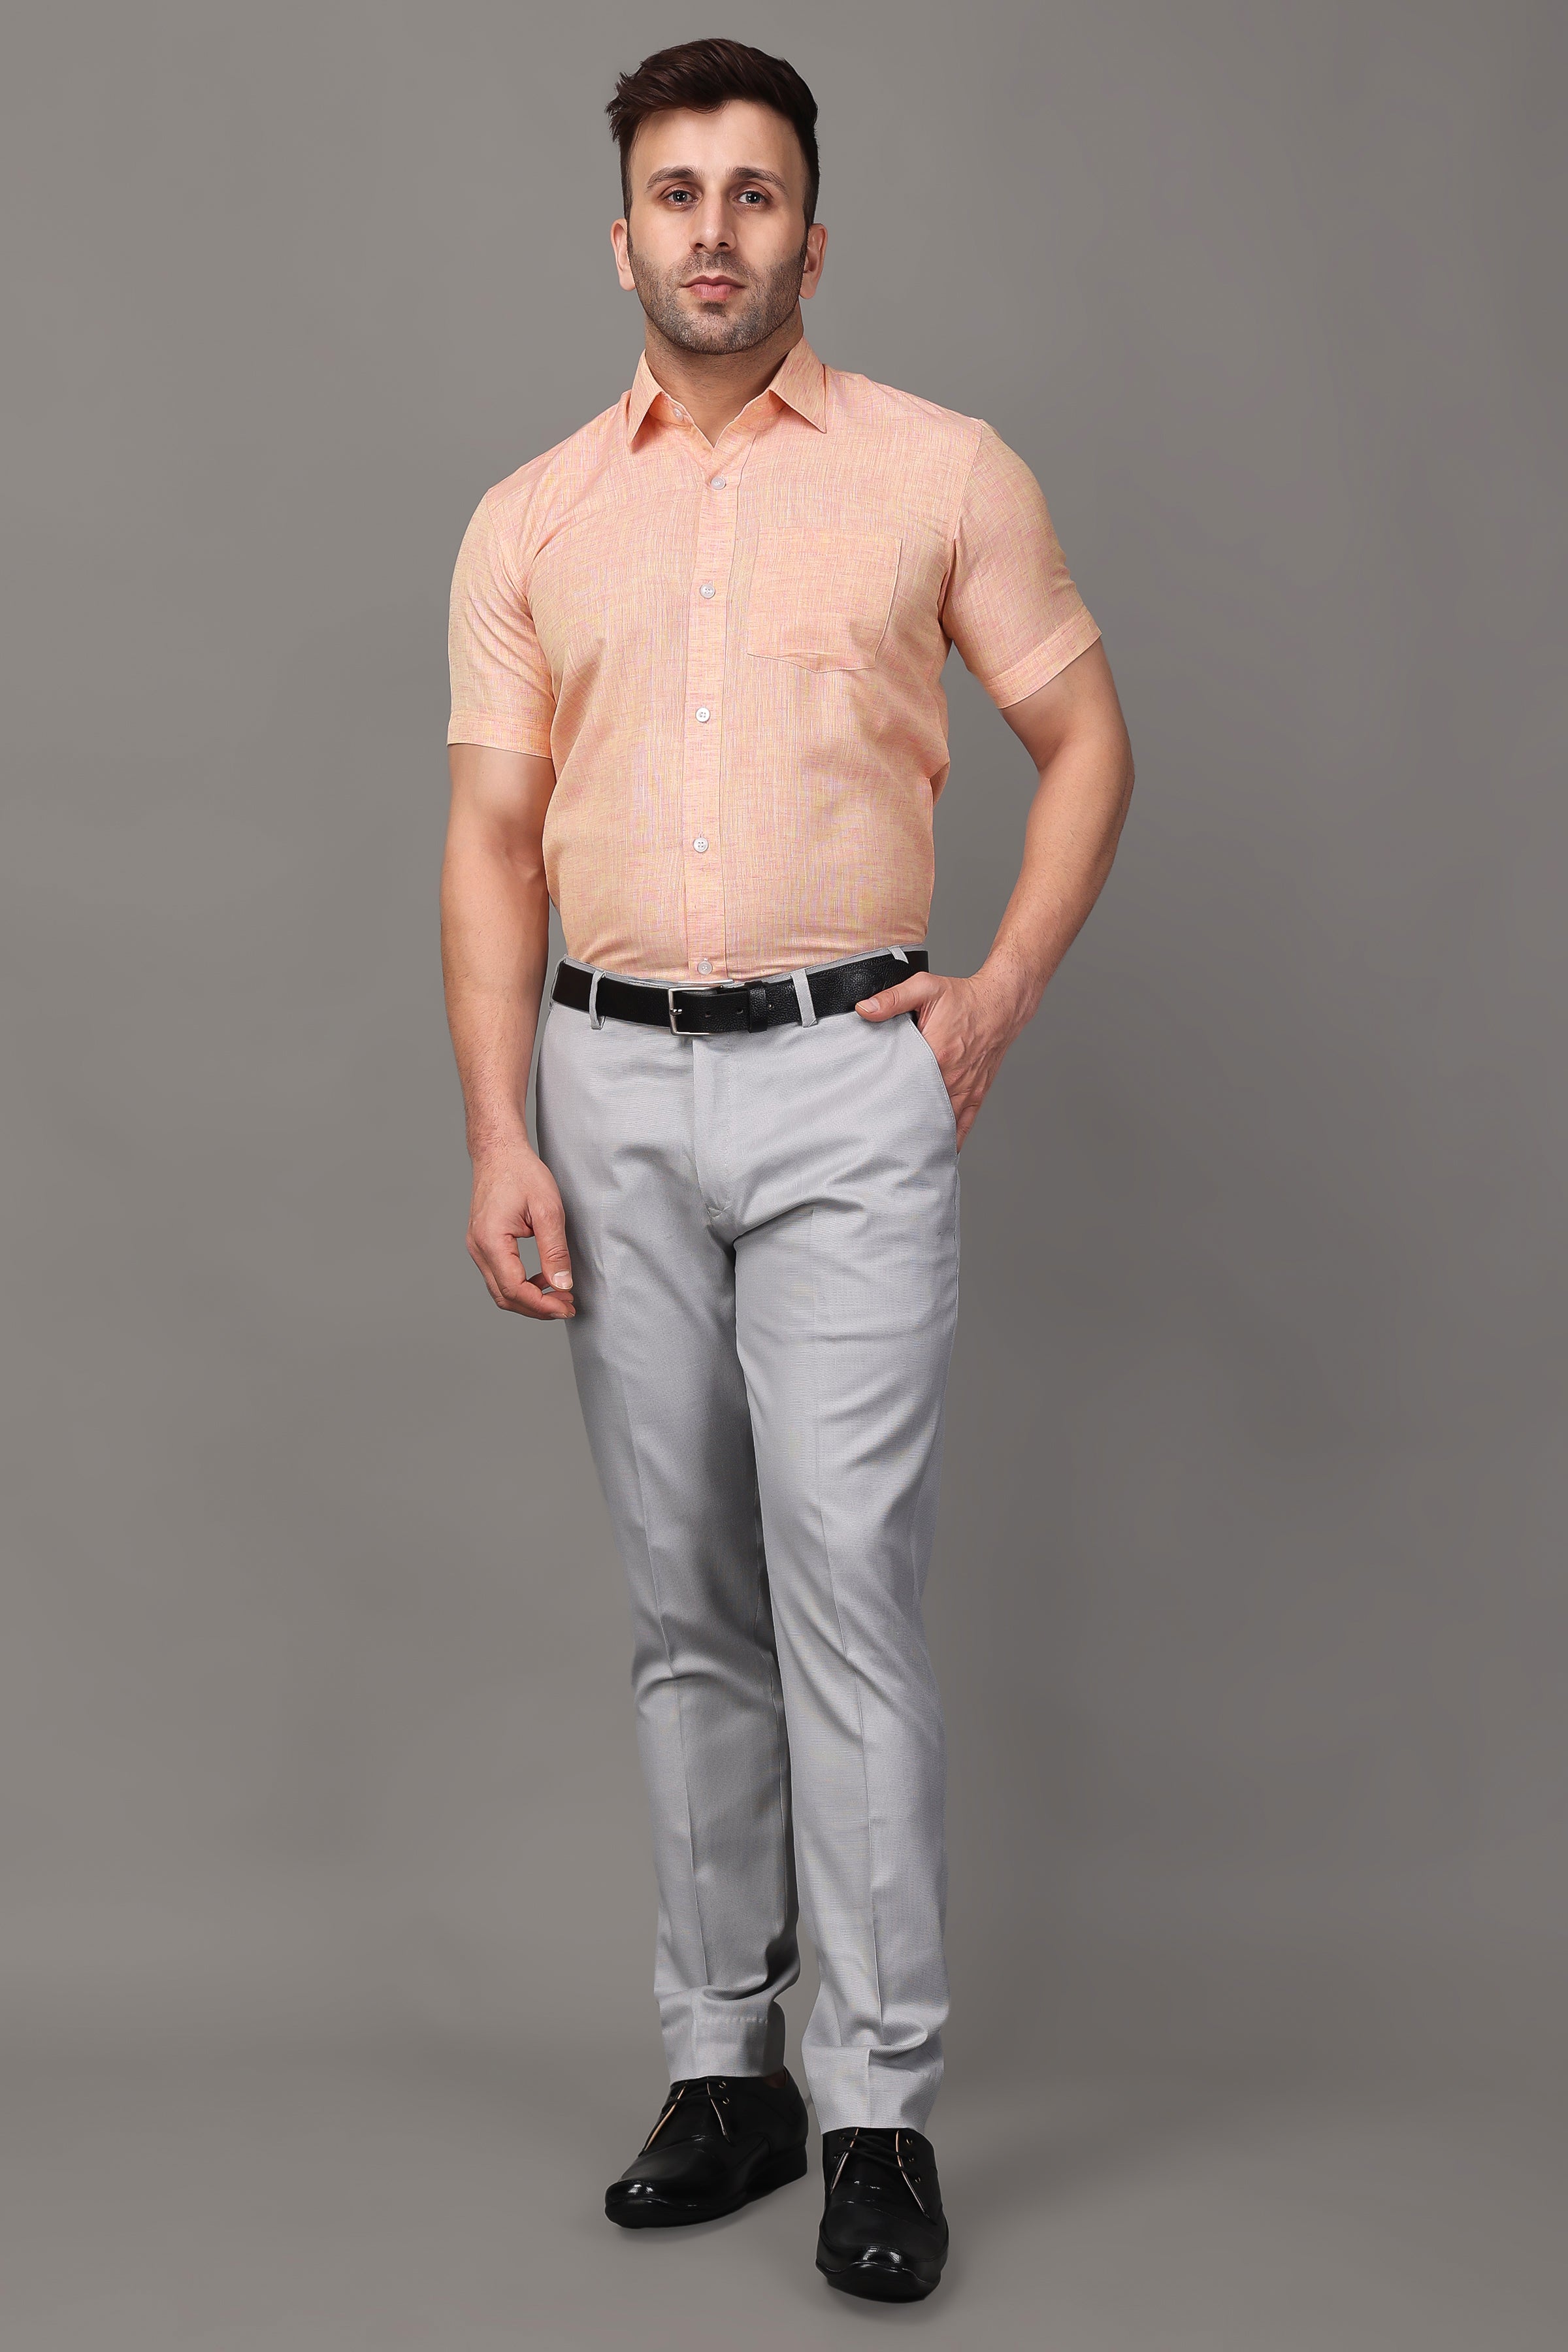 Buy Peach Shirt with Dark Grey Chinos: Pack of 2 Online in India -Beyoung